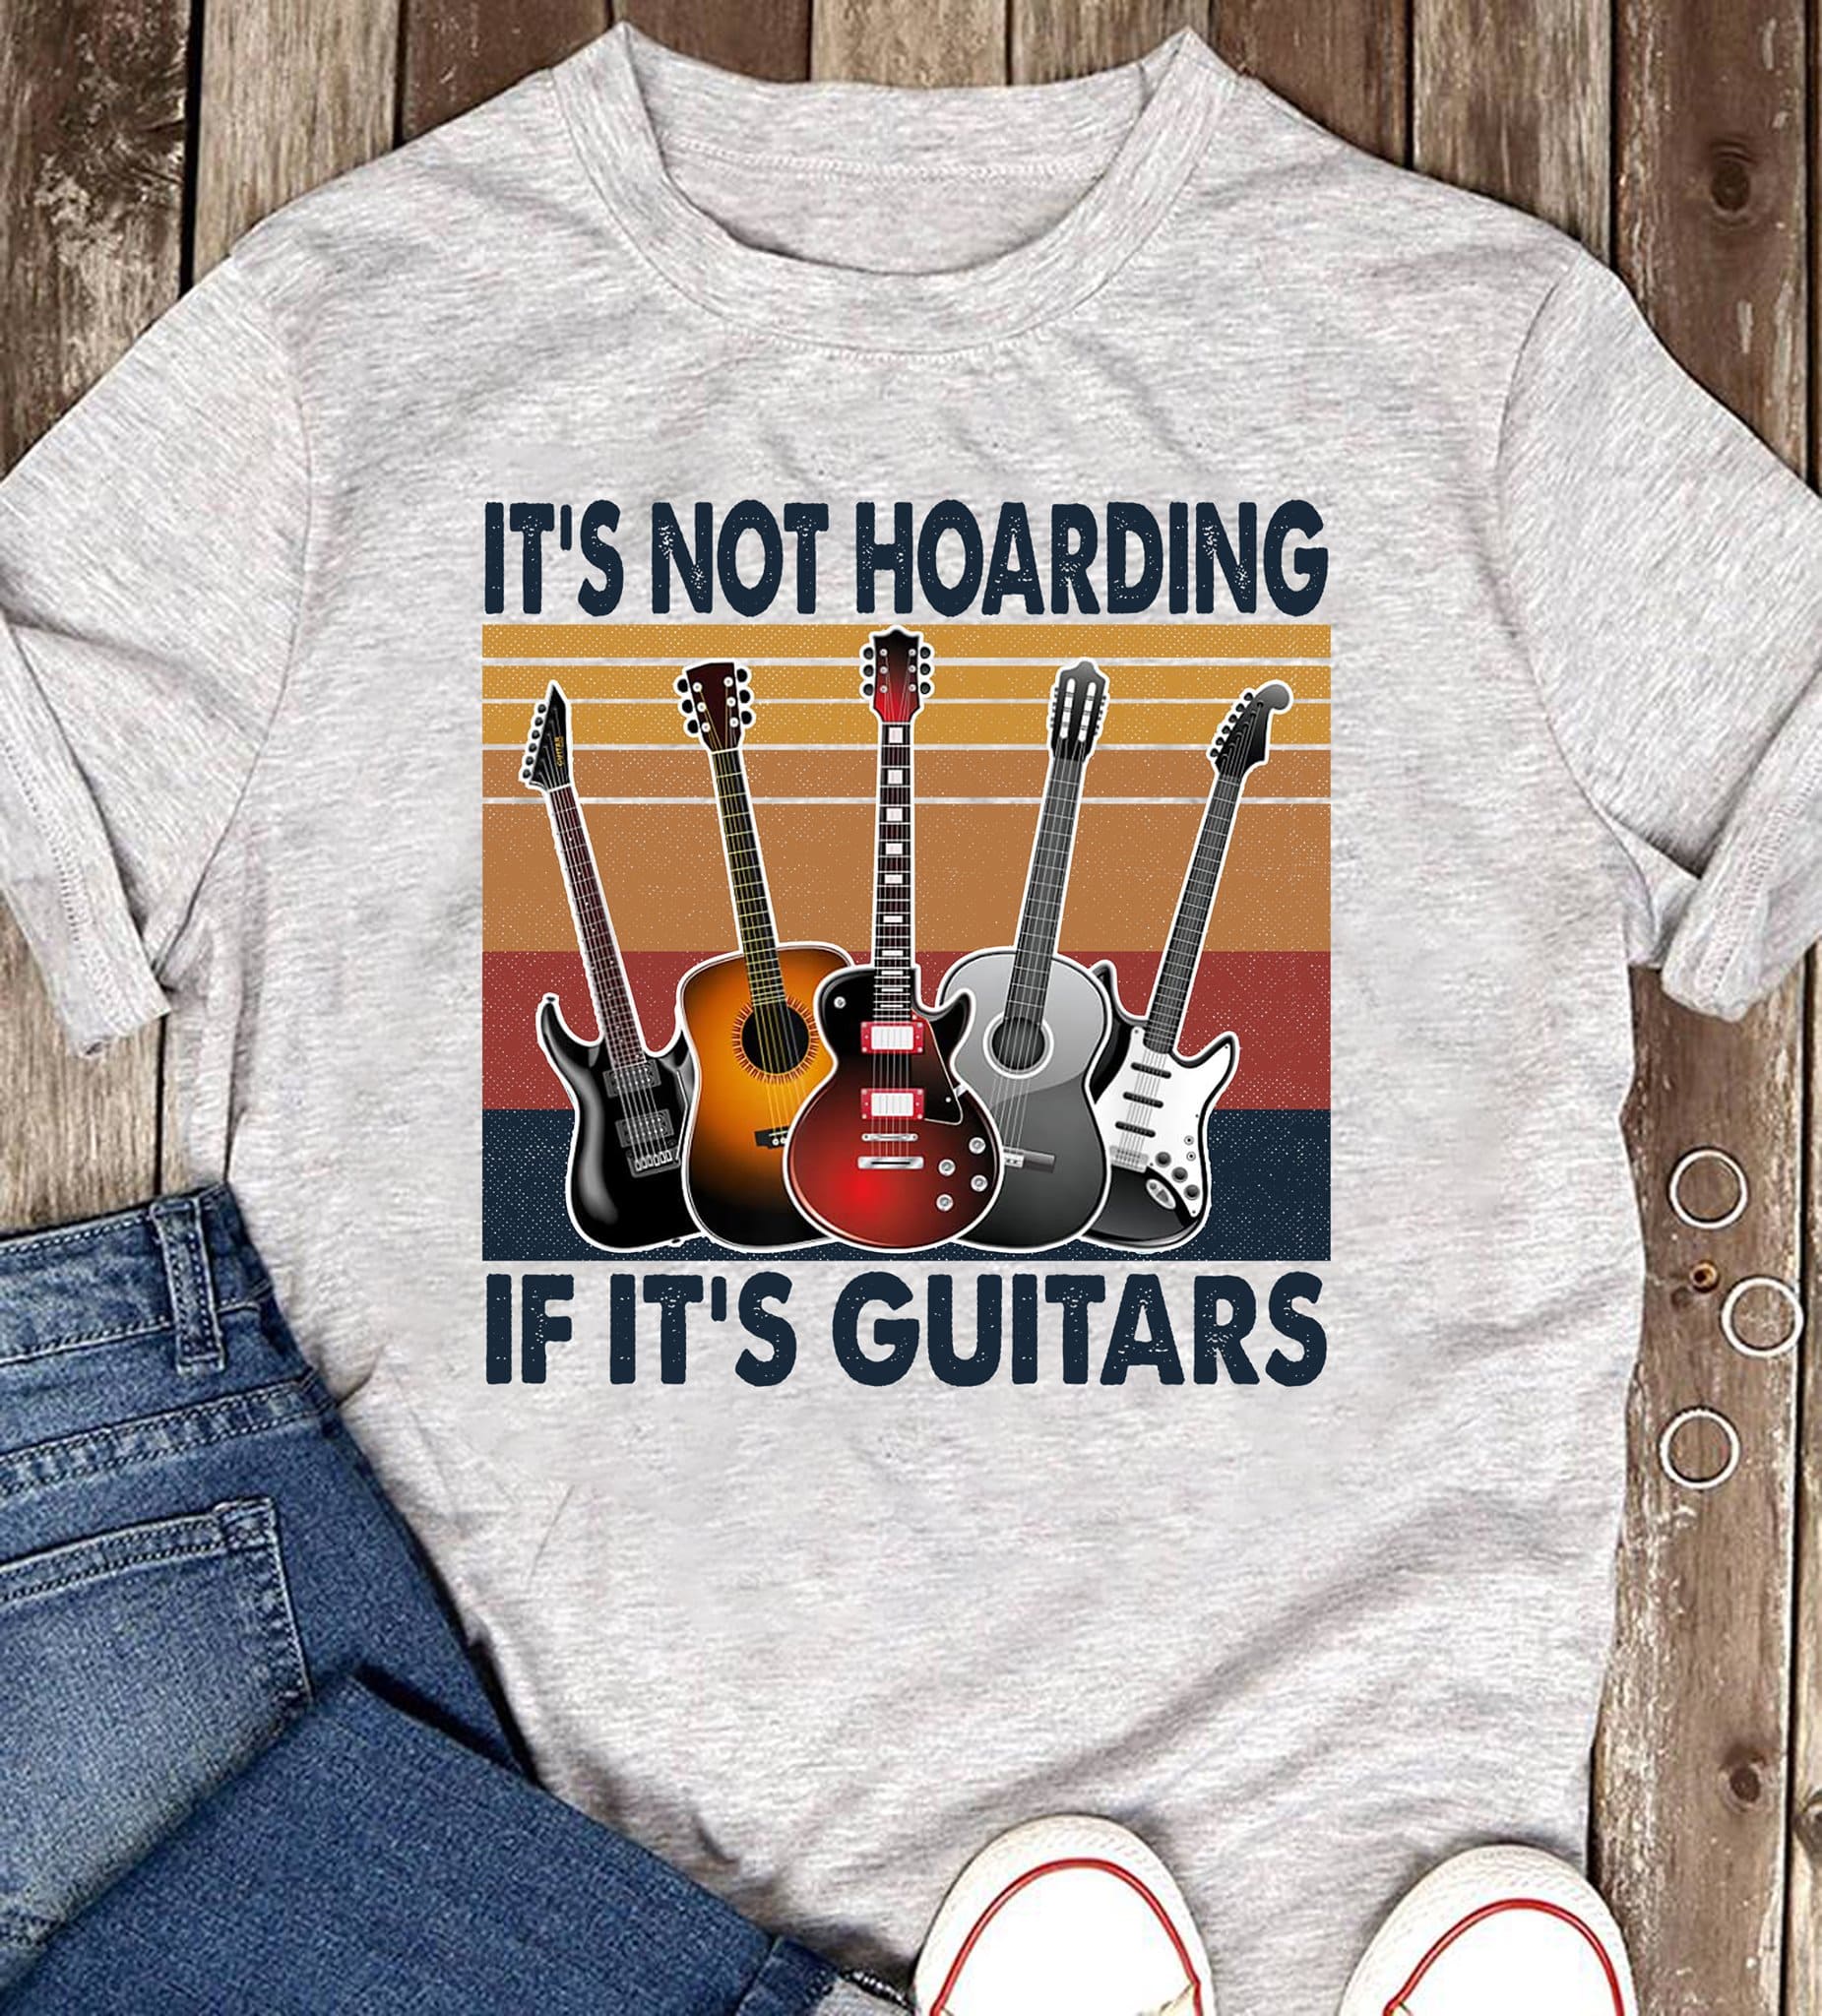 It's not hoarding if It's guitars - Gift for guitar collector, love playing guitar